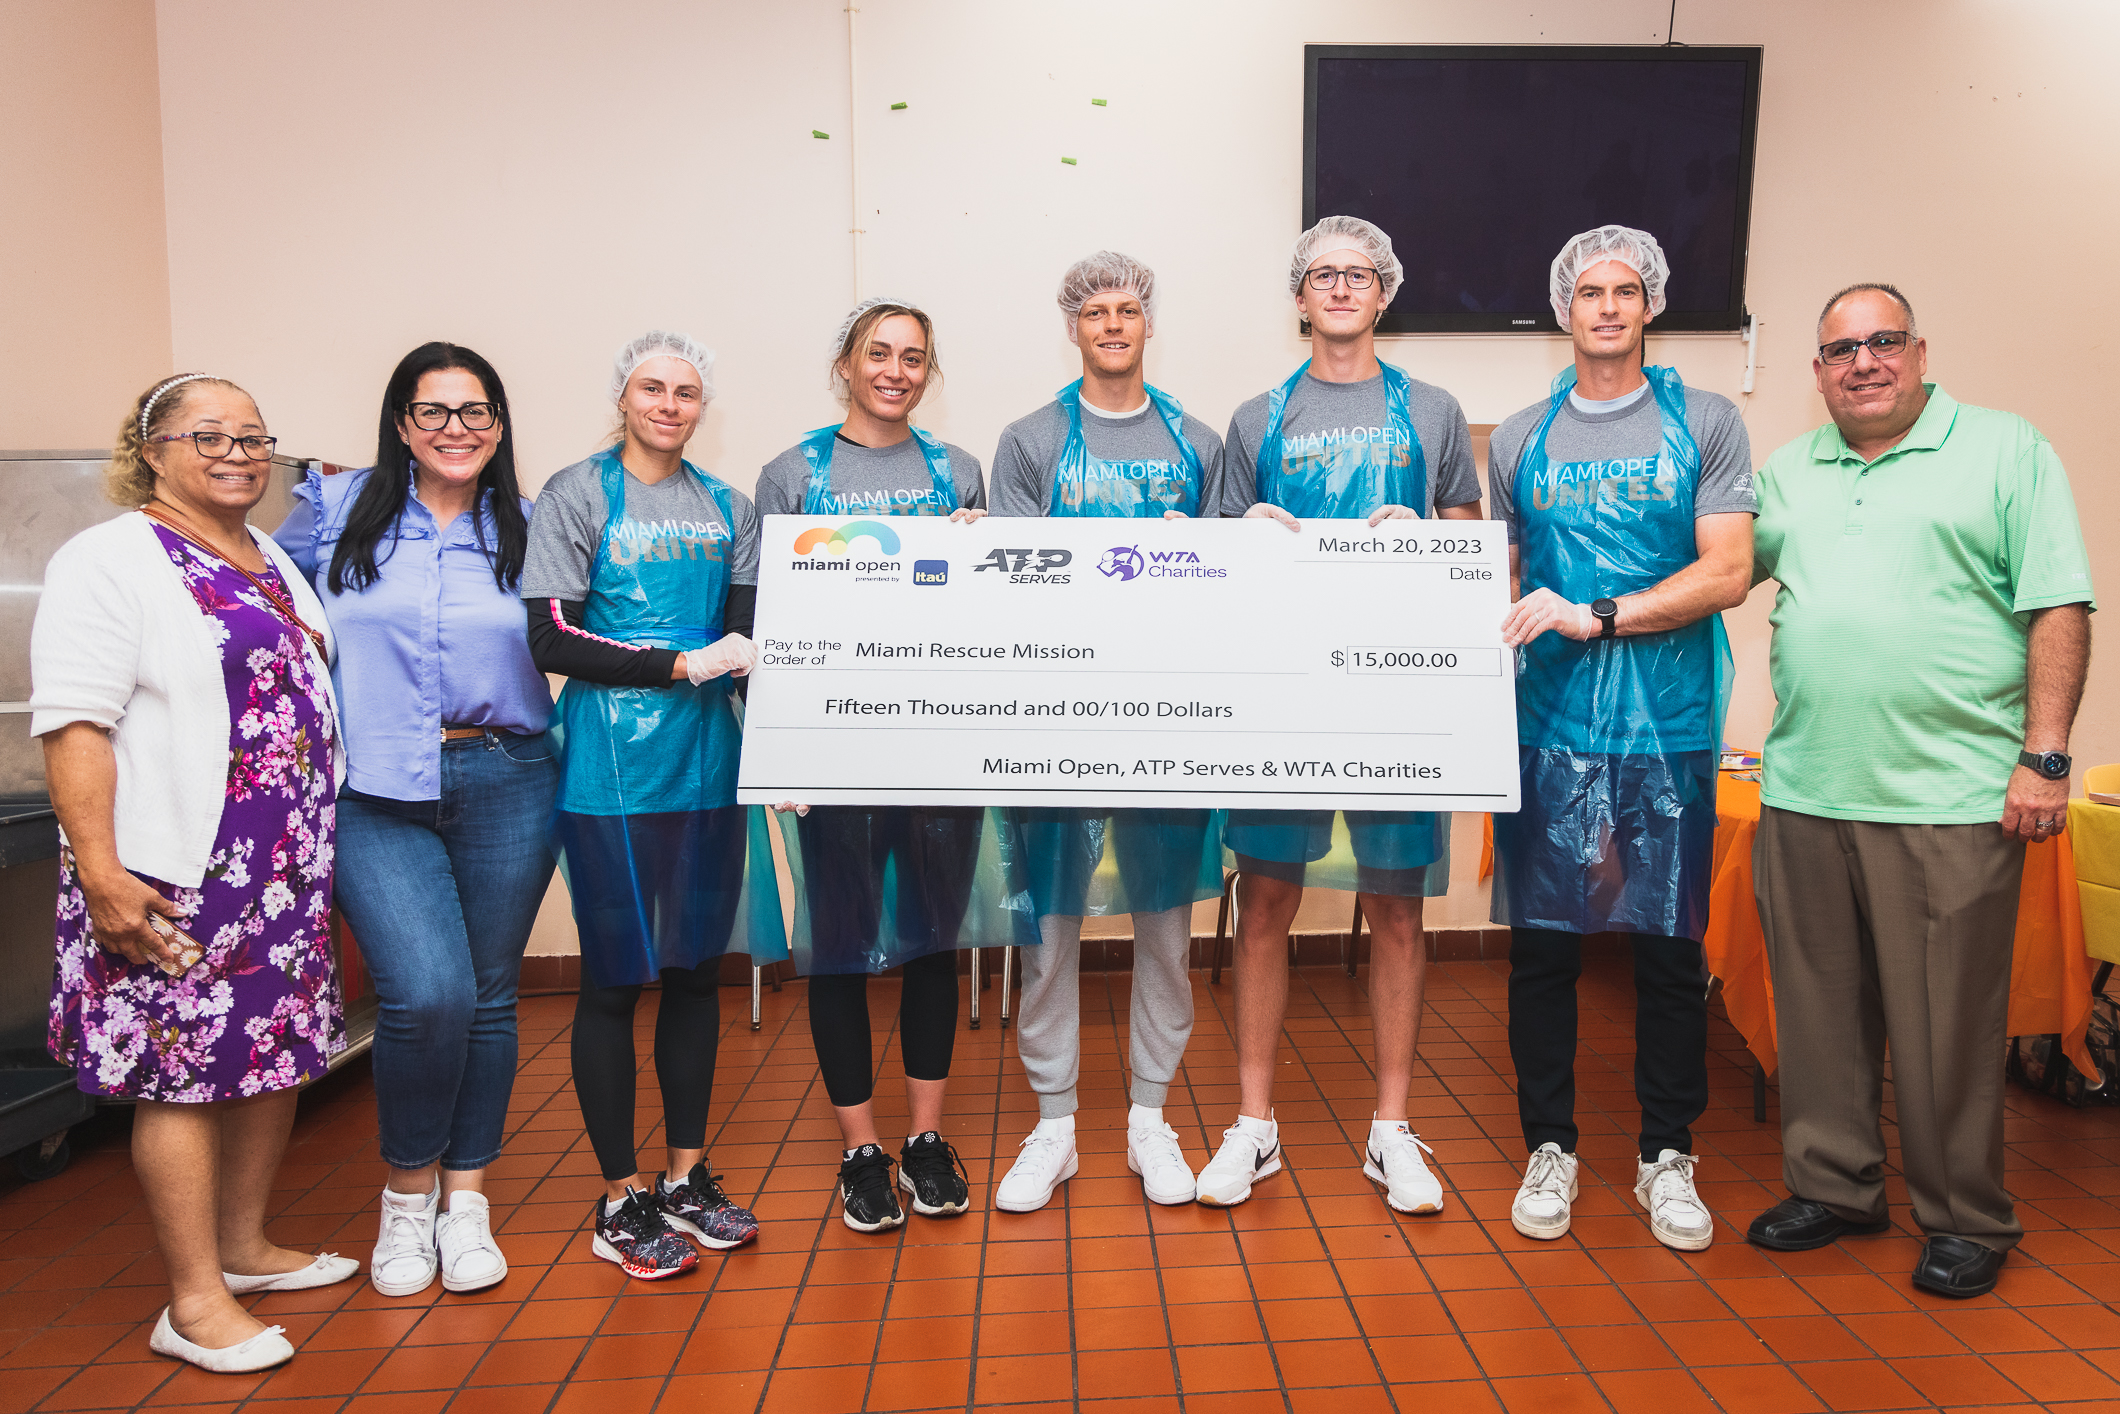 WTA Players Magda Linette, Paula Badosa and ATP Players Jannik Sinner, Sebastian Korda and Andy Murray present a check to the Miami Rescues Mission on March 20, 2023